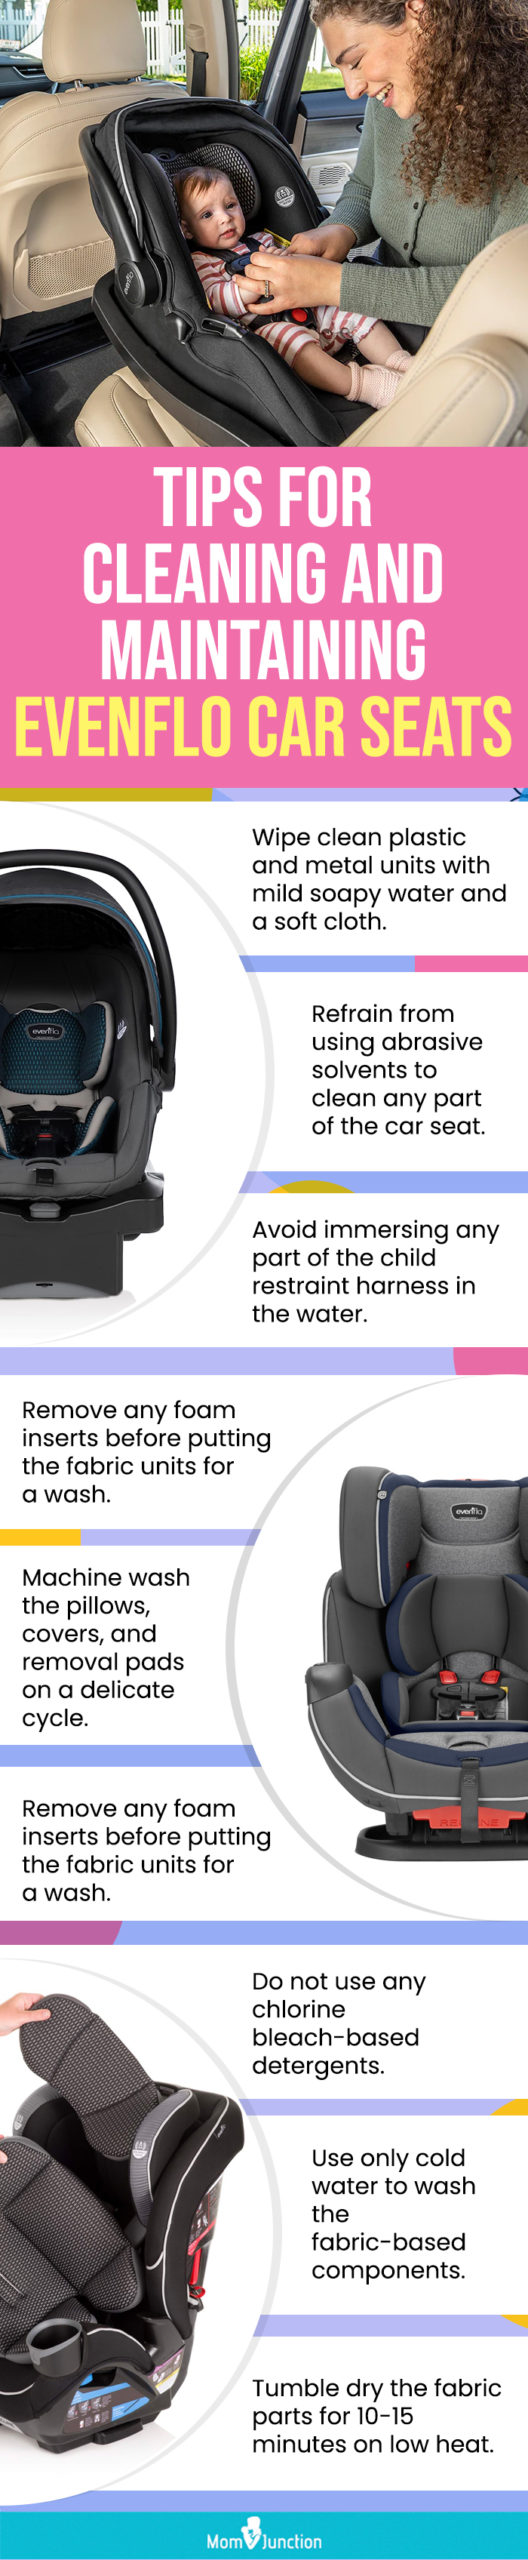 Tips For Cleaning And Maintaining Evenflo Car Seats (infographic)